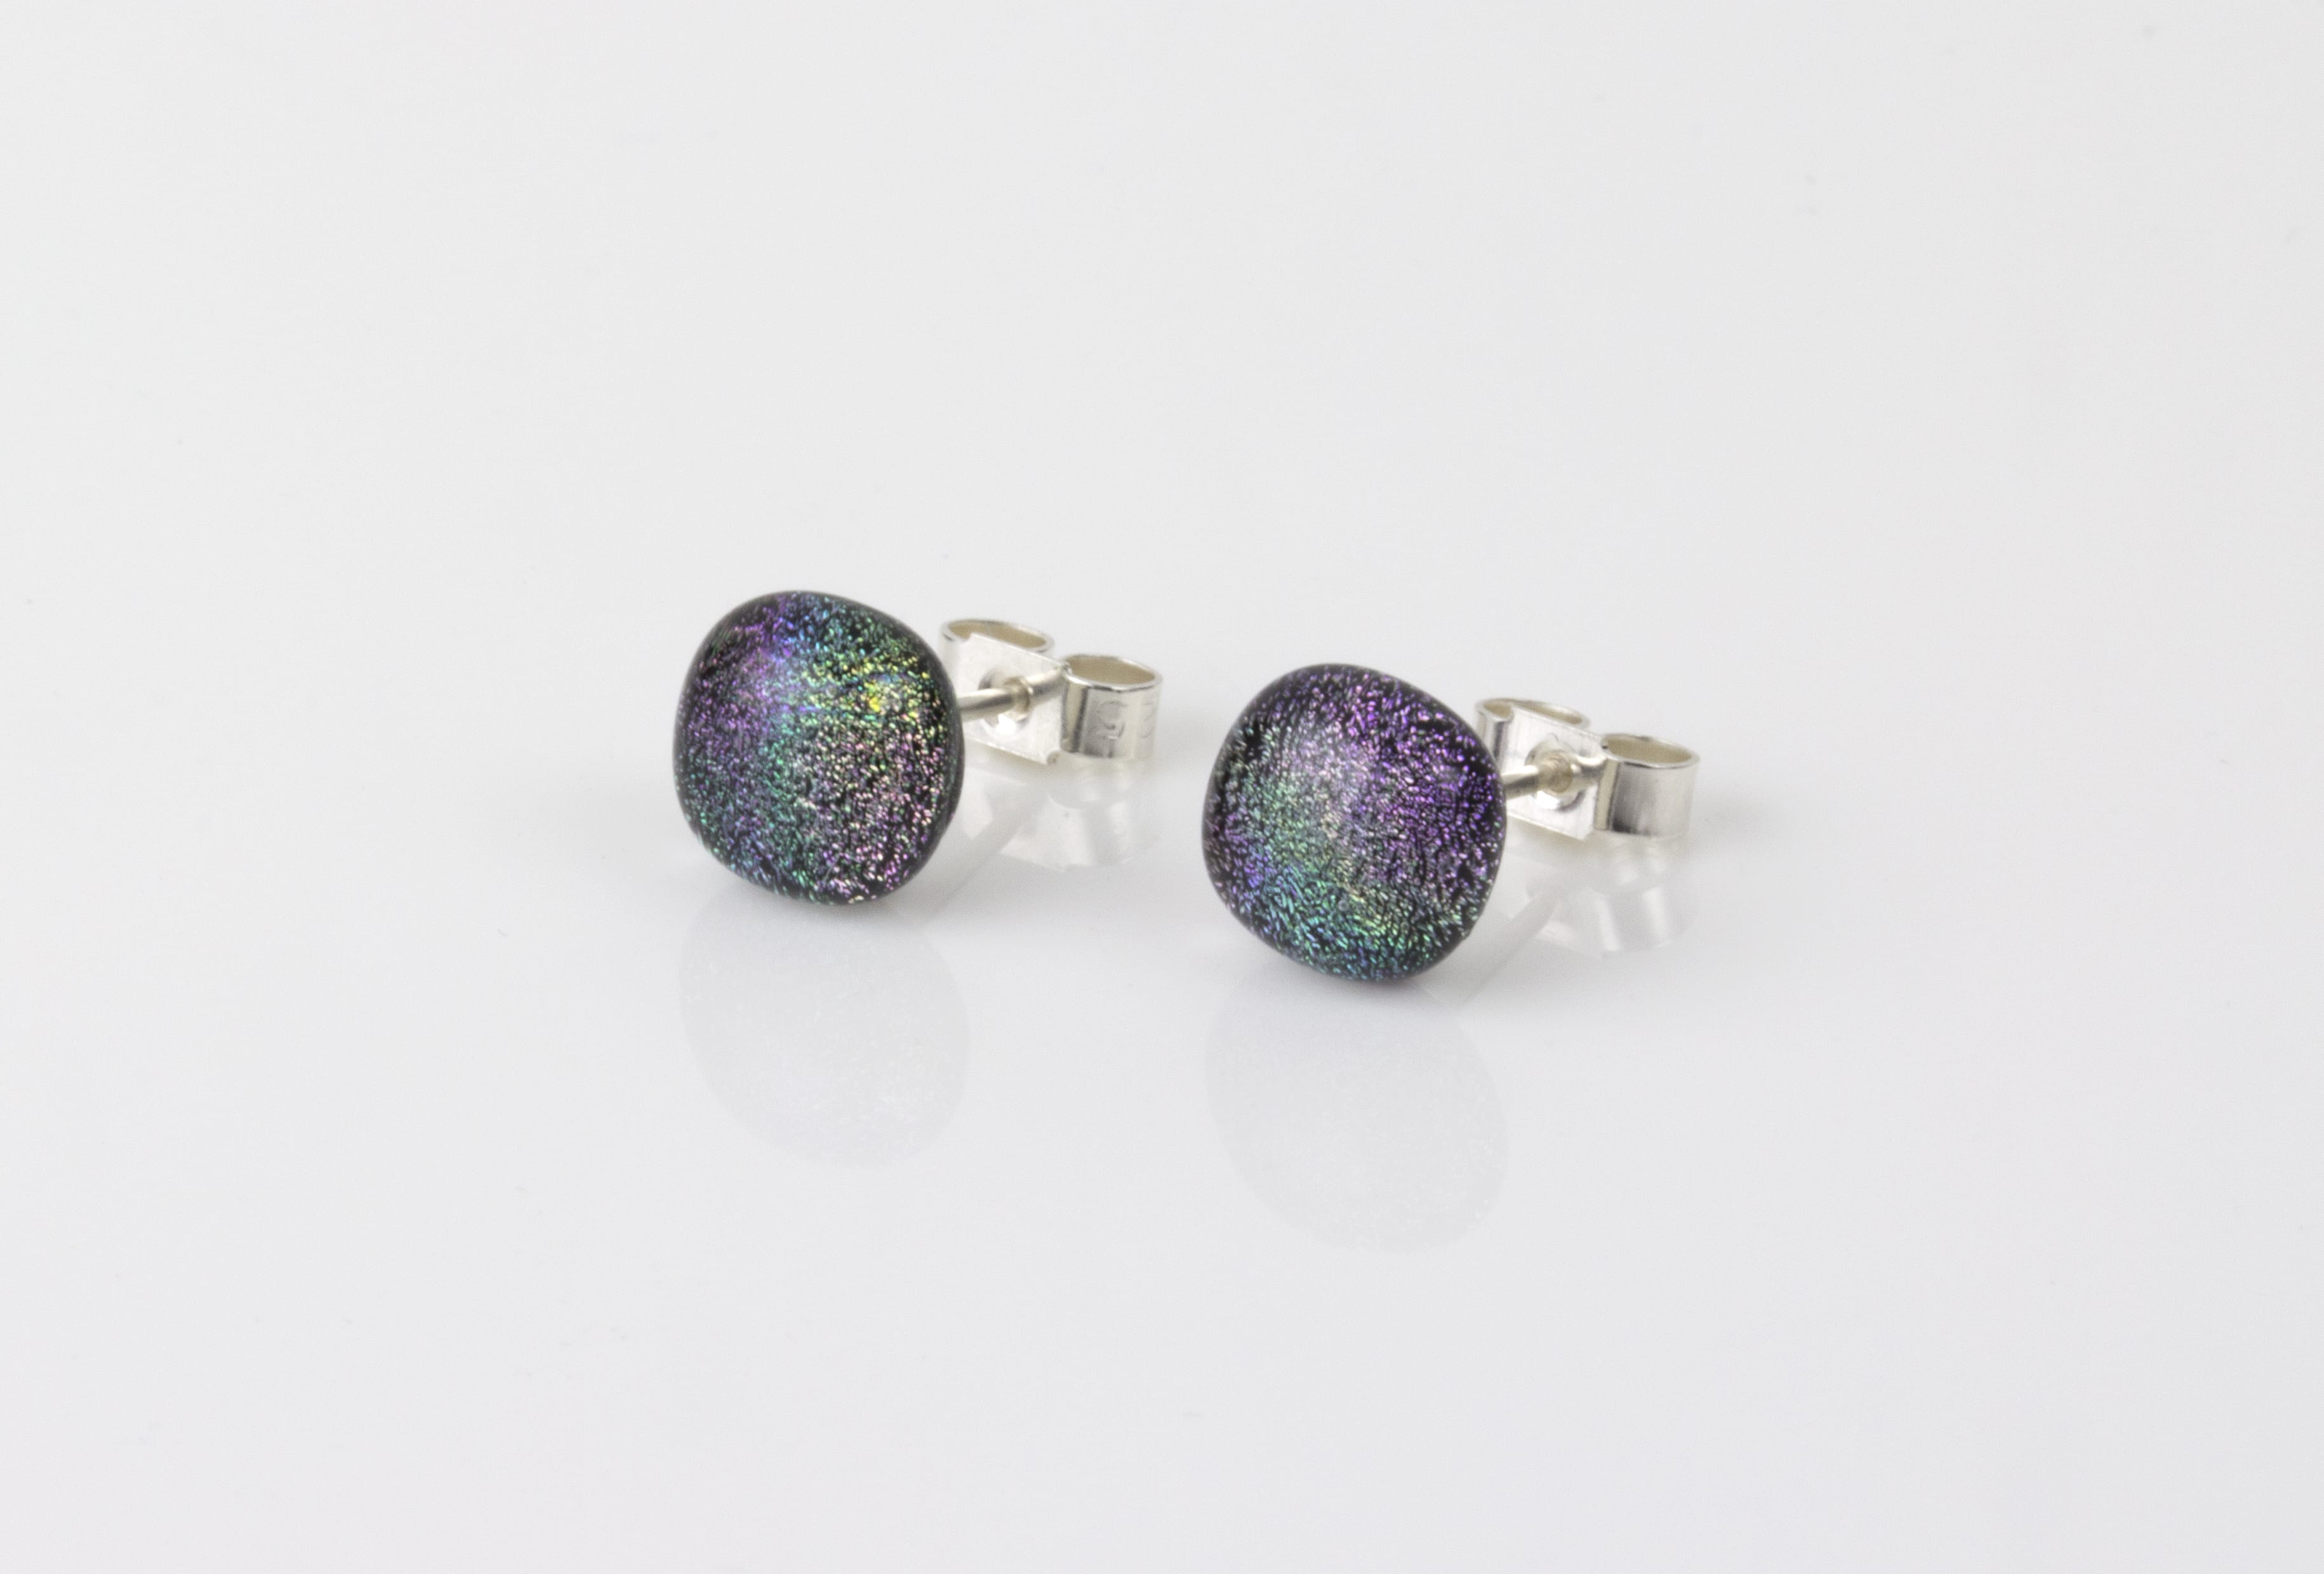 Dichroic glass jewellery uk, handmade stud earrings with reptilian coloured dichroic glass, round, sterling glass 7-9mm, silver posts.